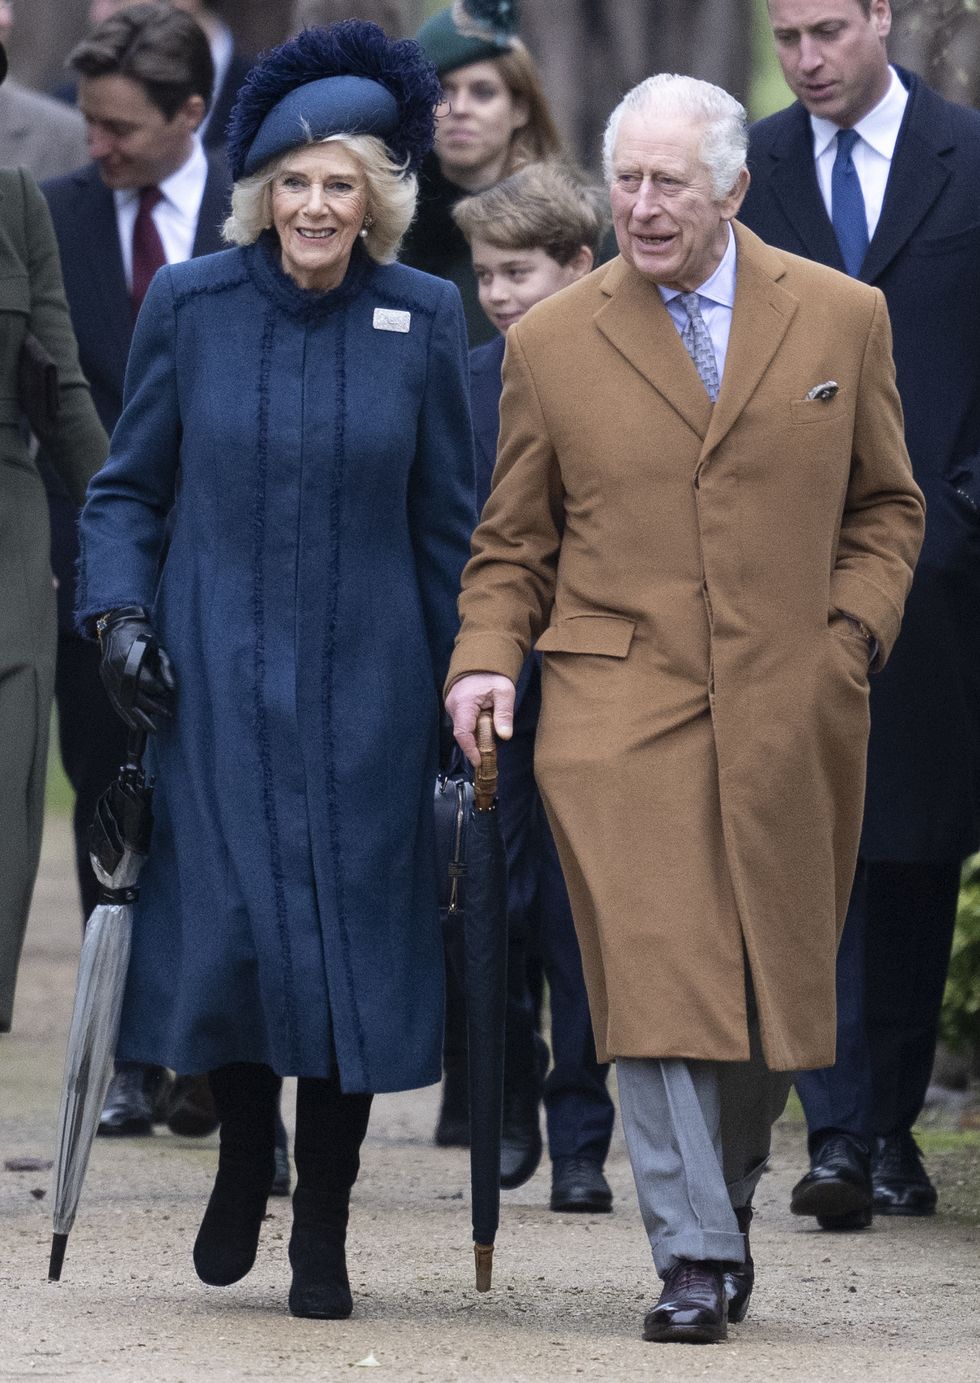 sandringham, norfolk december 25 king charles iii and camilla, queen consort attend the christmas day service at st mary magdalene church on december 25, 2022 in sandringham, norfolk king charles iii ascended to the throne on september 8, 2022, with his coronation set for may 6, 2023 photo by uk press pooluk press via getty images